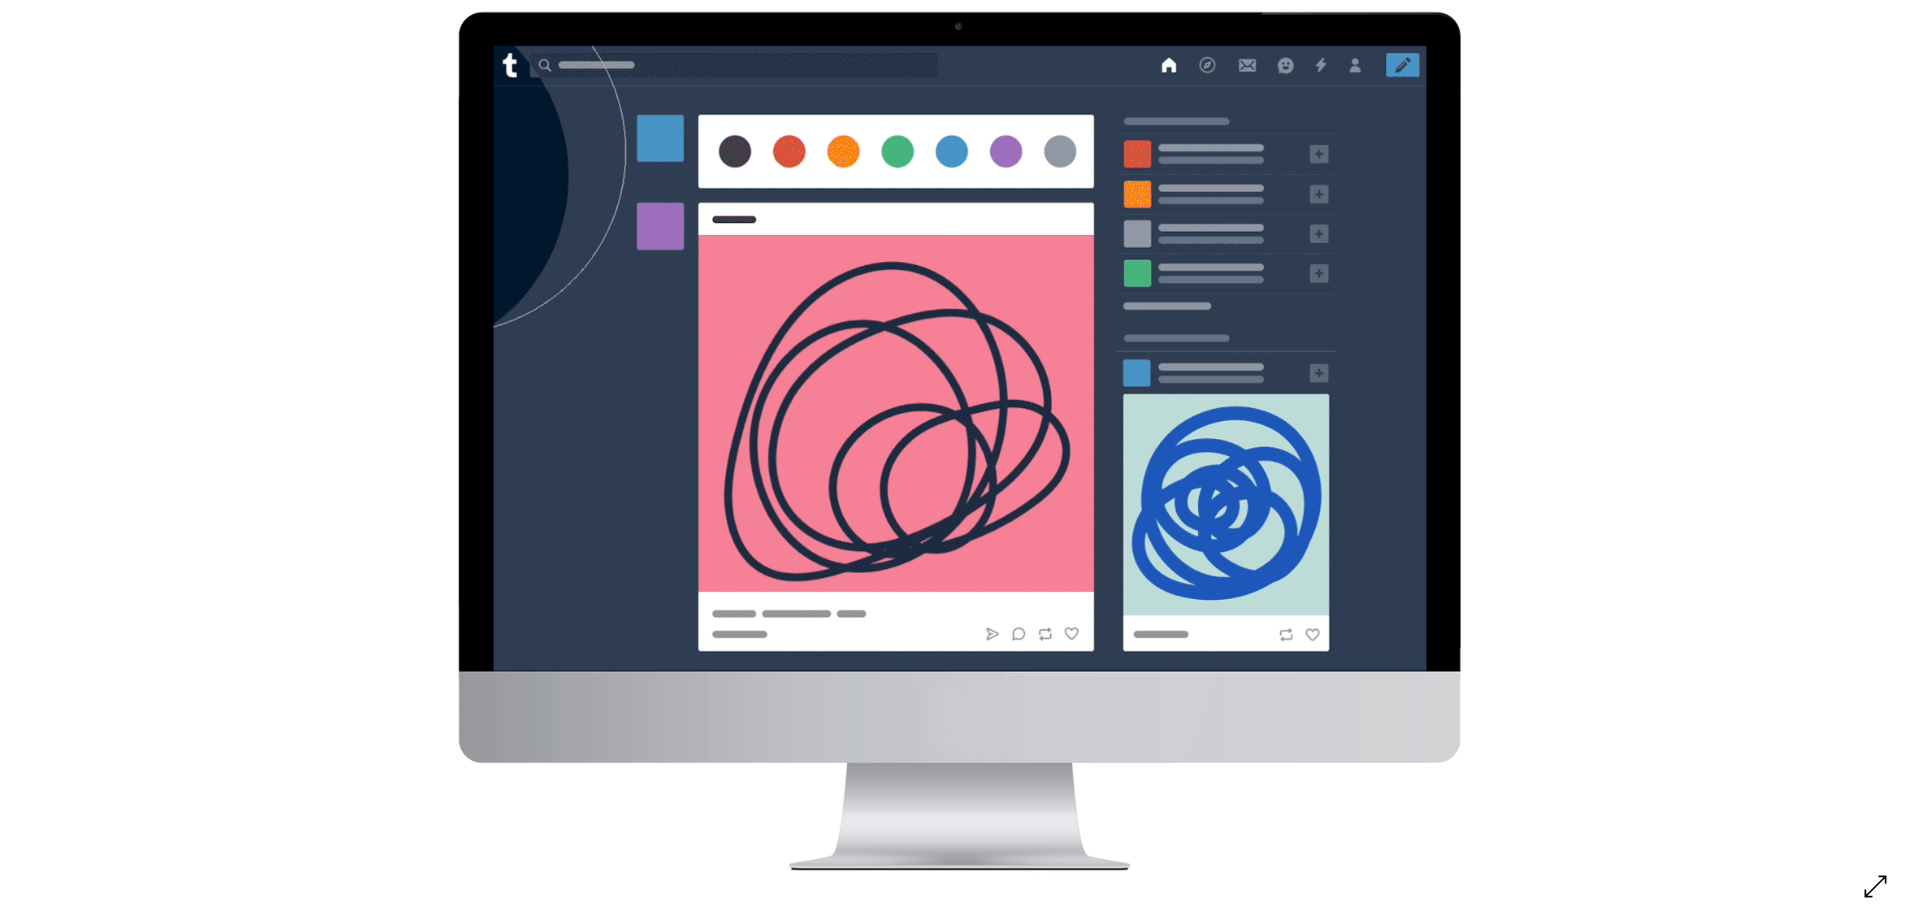 [Updated] Tumblr gets a facelift - new dashboard colors update where 'blue is darker, grays are lighter'